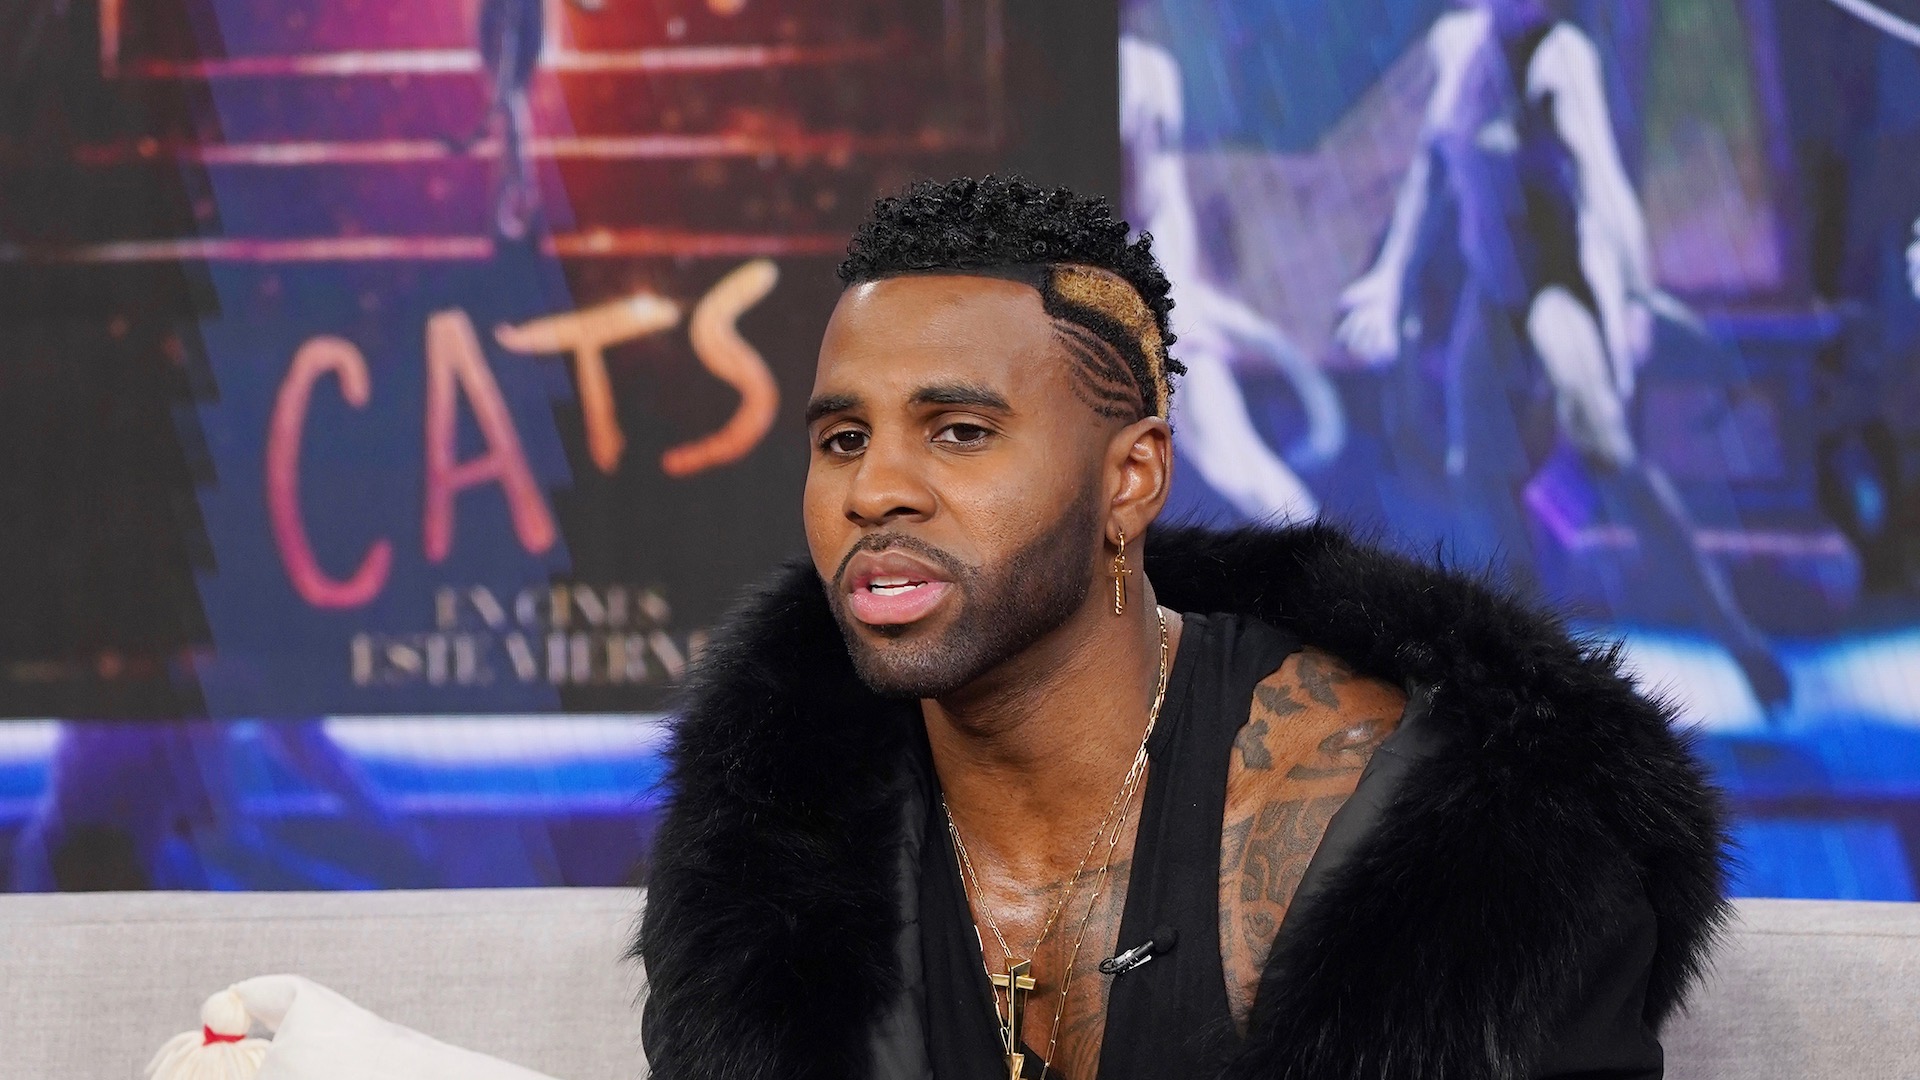 Jason Derulo Mistakenly Believed 'Cats' Would 'Change the World'